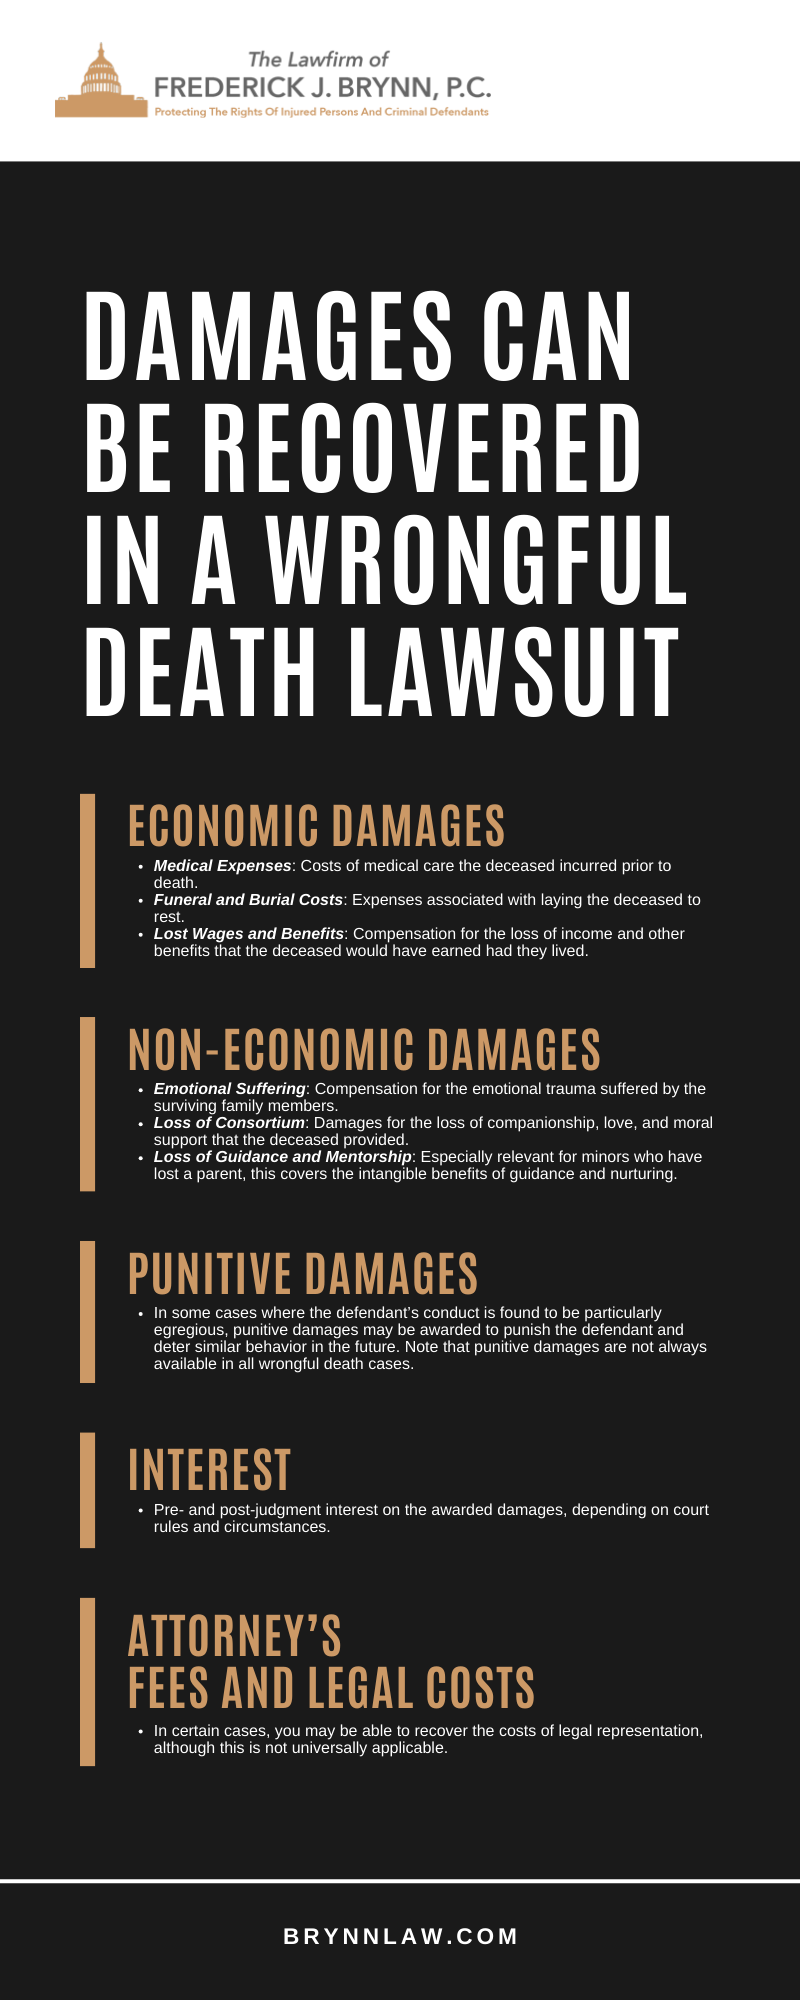 Damages Can Be Recovered In A Wrongful Death Lawsuit Infographic